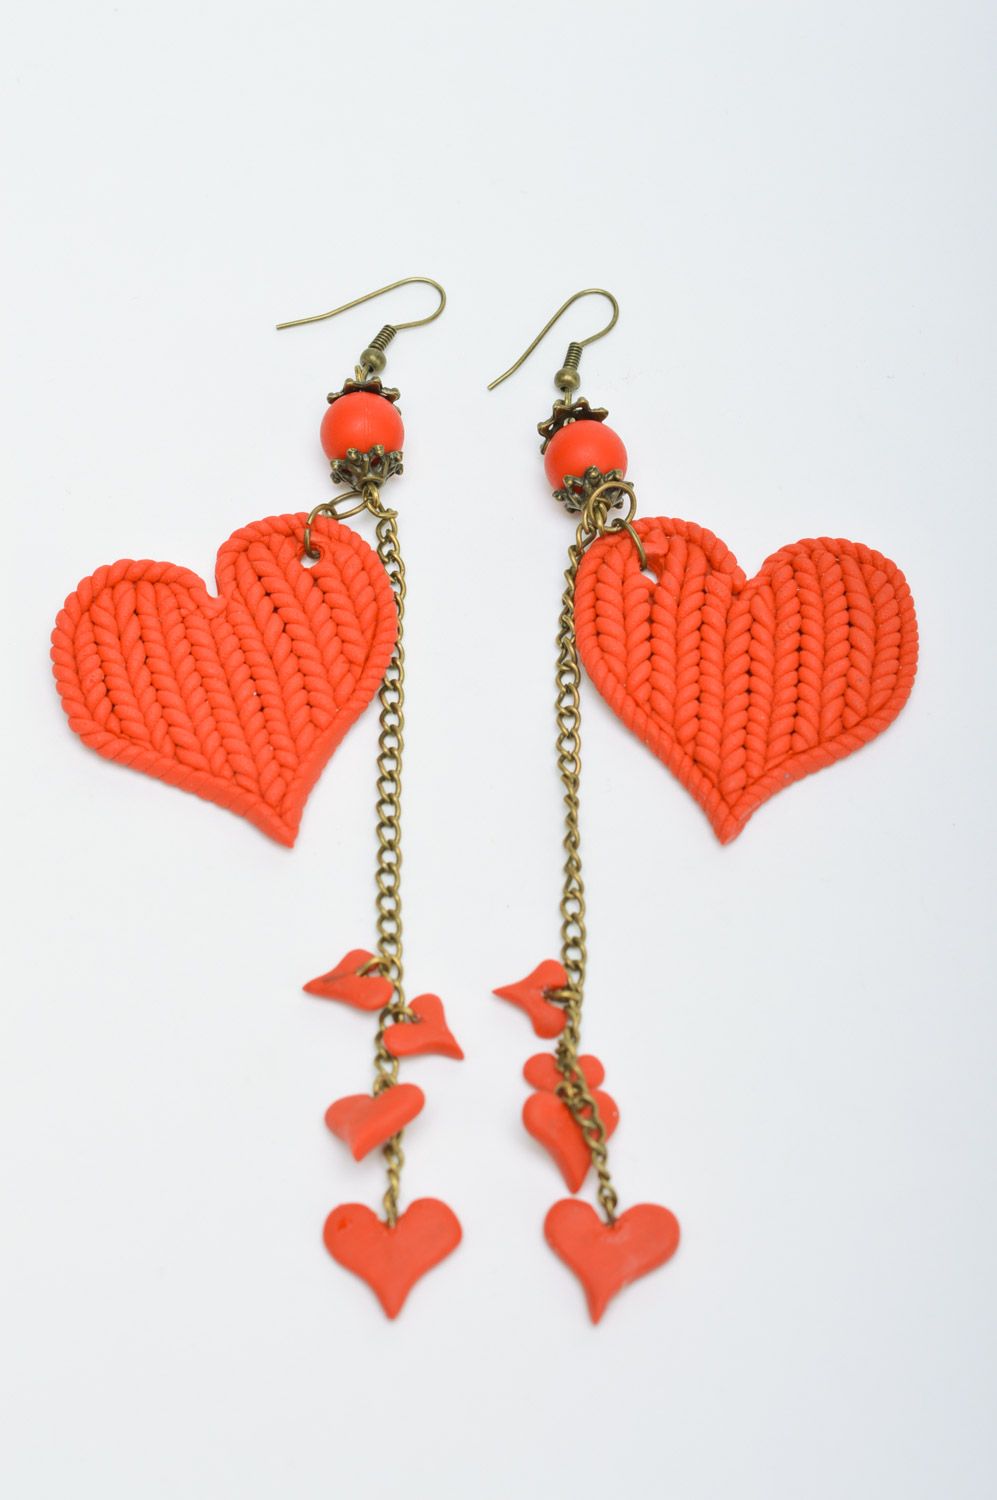 Long handmade earrings with red heart charms and with  knitted texture photo 2